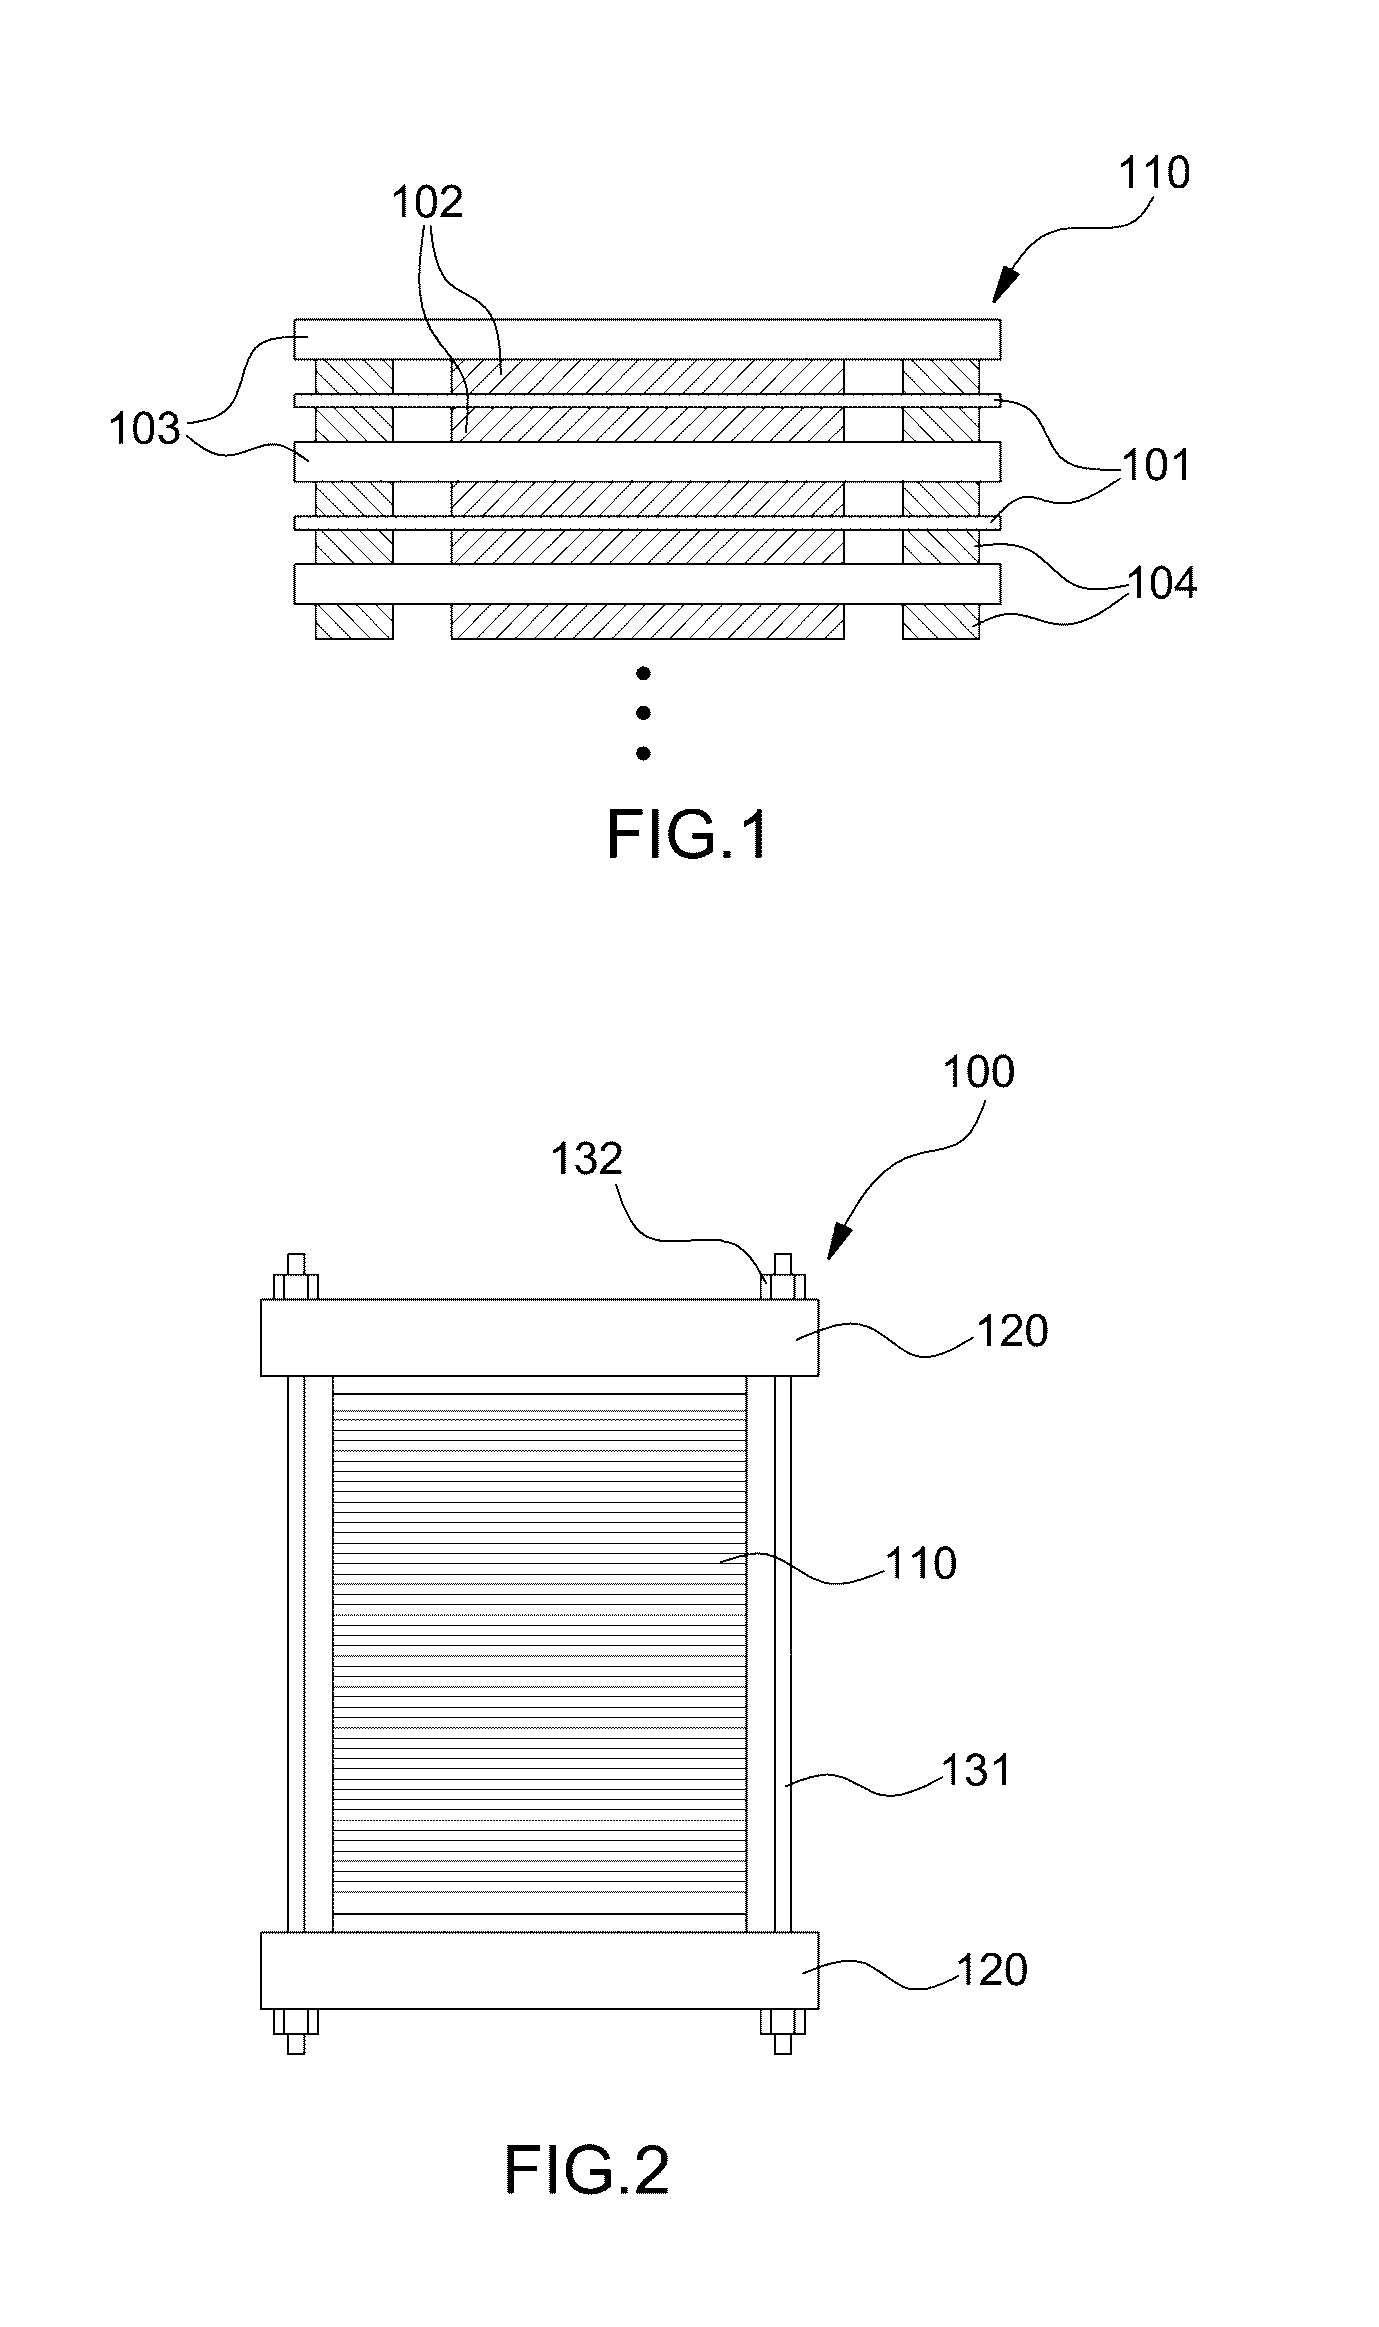 Structure for mounting fuel cell stack